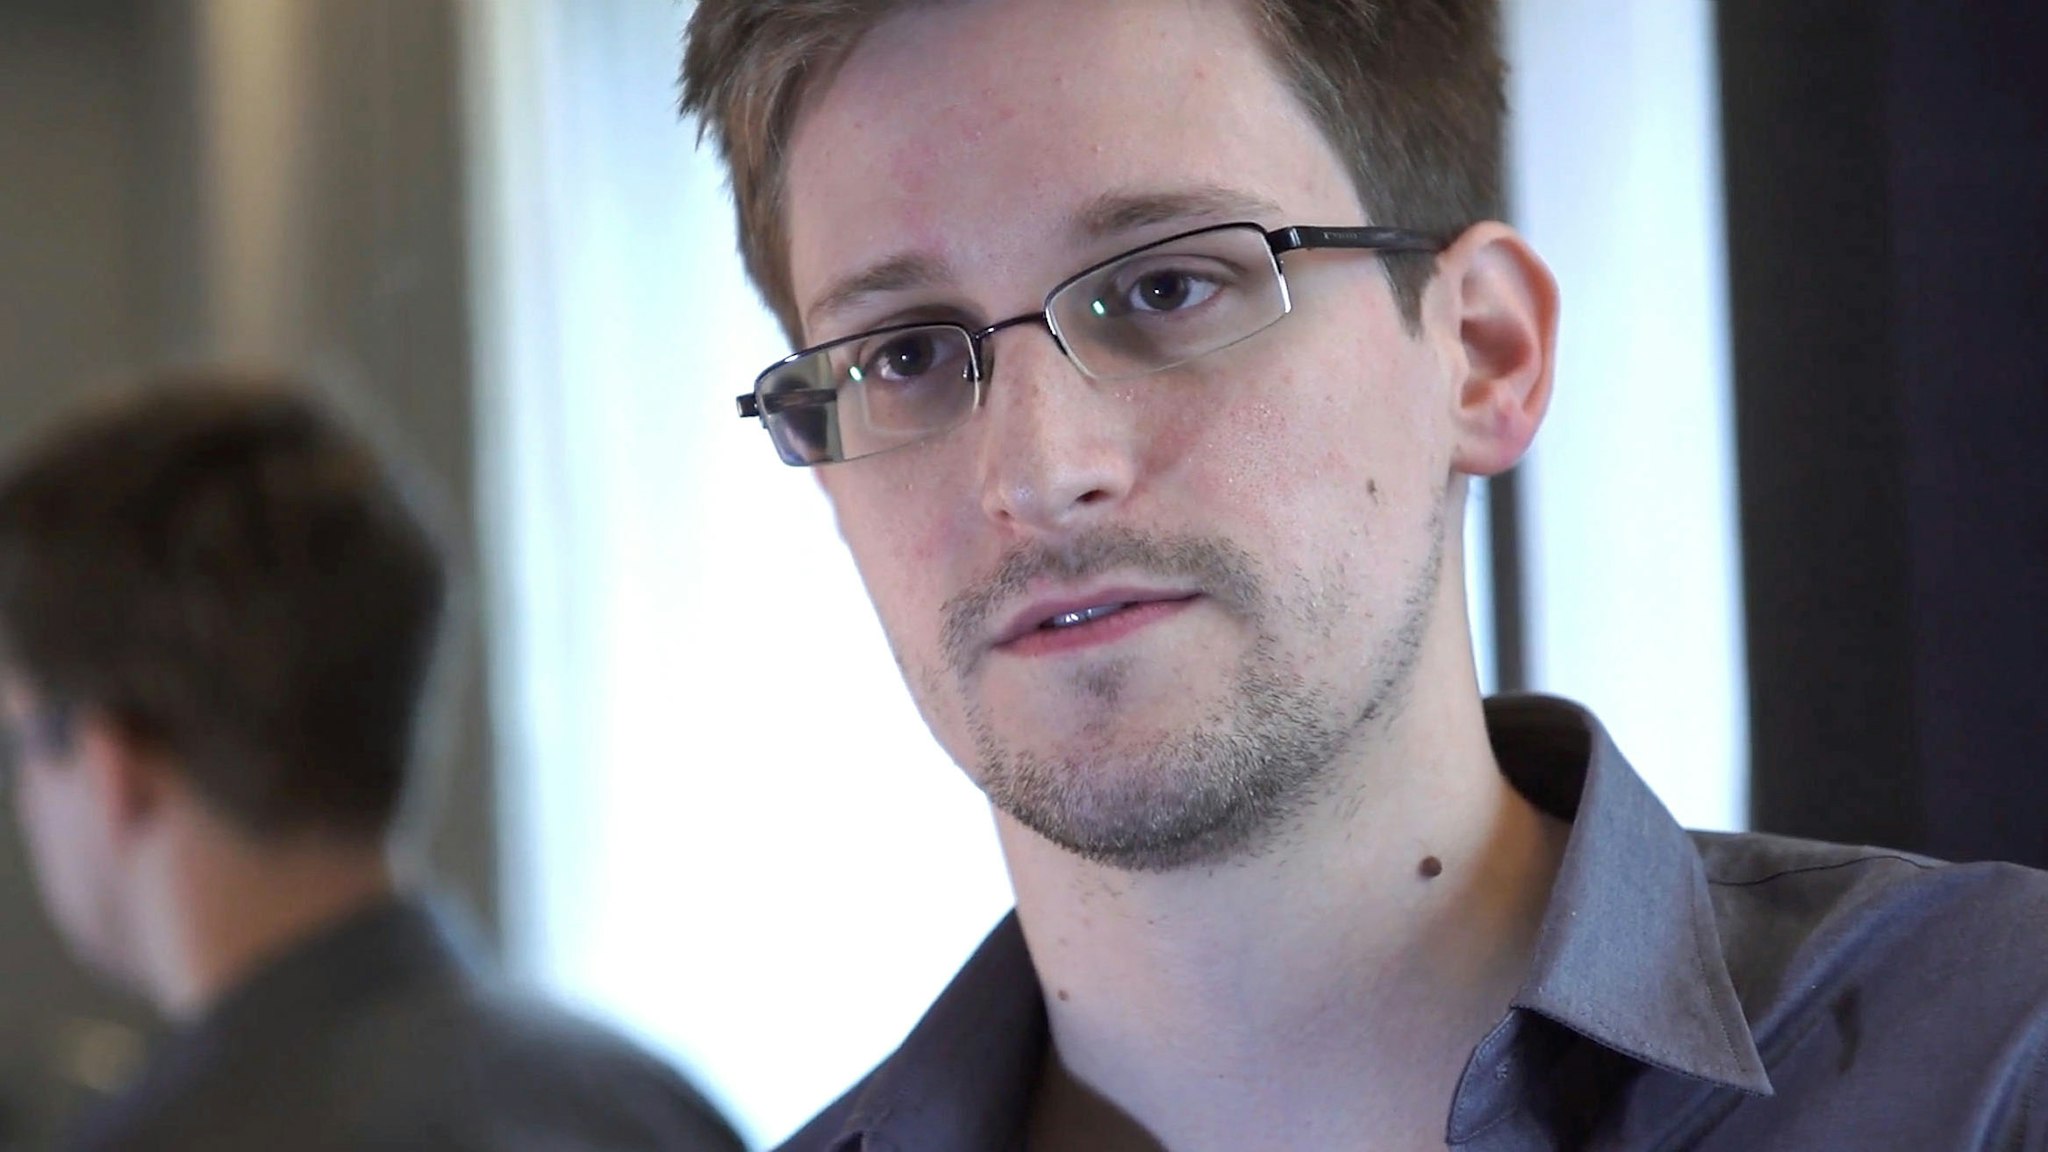 Edward Snowden speaks during an interview in Hong Kong. Snowden, a 29-year-old former technical assistant for the CIA, revealed details of top-secret surveillance conducted by the United States' National Security Agency regarding telecom data.